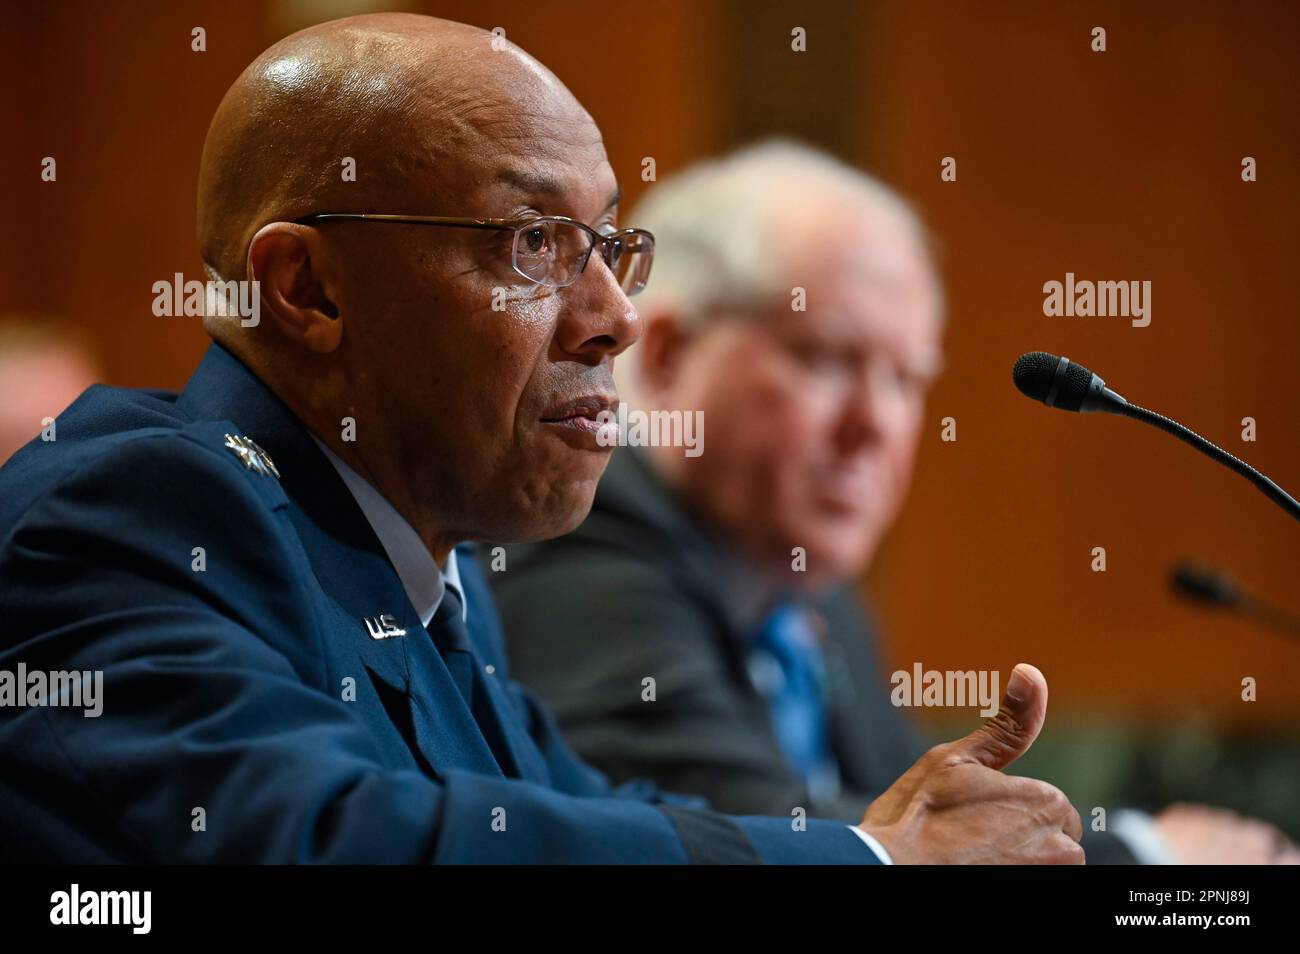 Washington, United States Of America. 18th Apr, 2023. Washington, United States of America. 18 April, 2023. U.S. Air Force Chief of Staff Gen. CQ Brown, Jr., testifies before the Senate Appropriations Subcommittee on Defense hearing on the Air Force fiscal year 2024 budget on Capitol Hill, April 18, 2023 in Washington, DC Credit: Eric Dietrich/Department of Defense/Alamy Live News Stock Photo